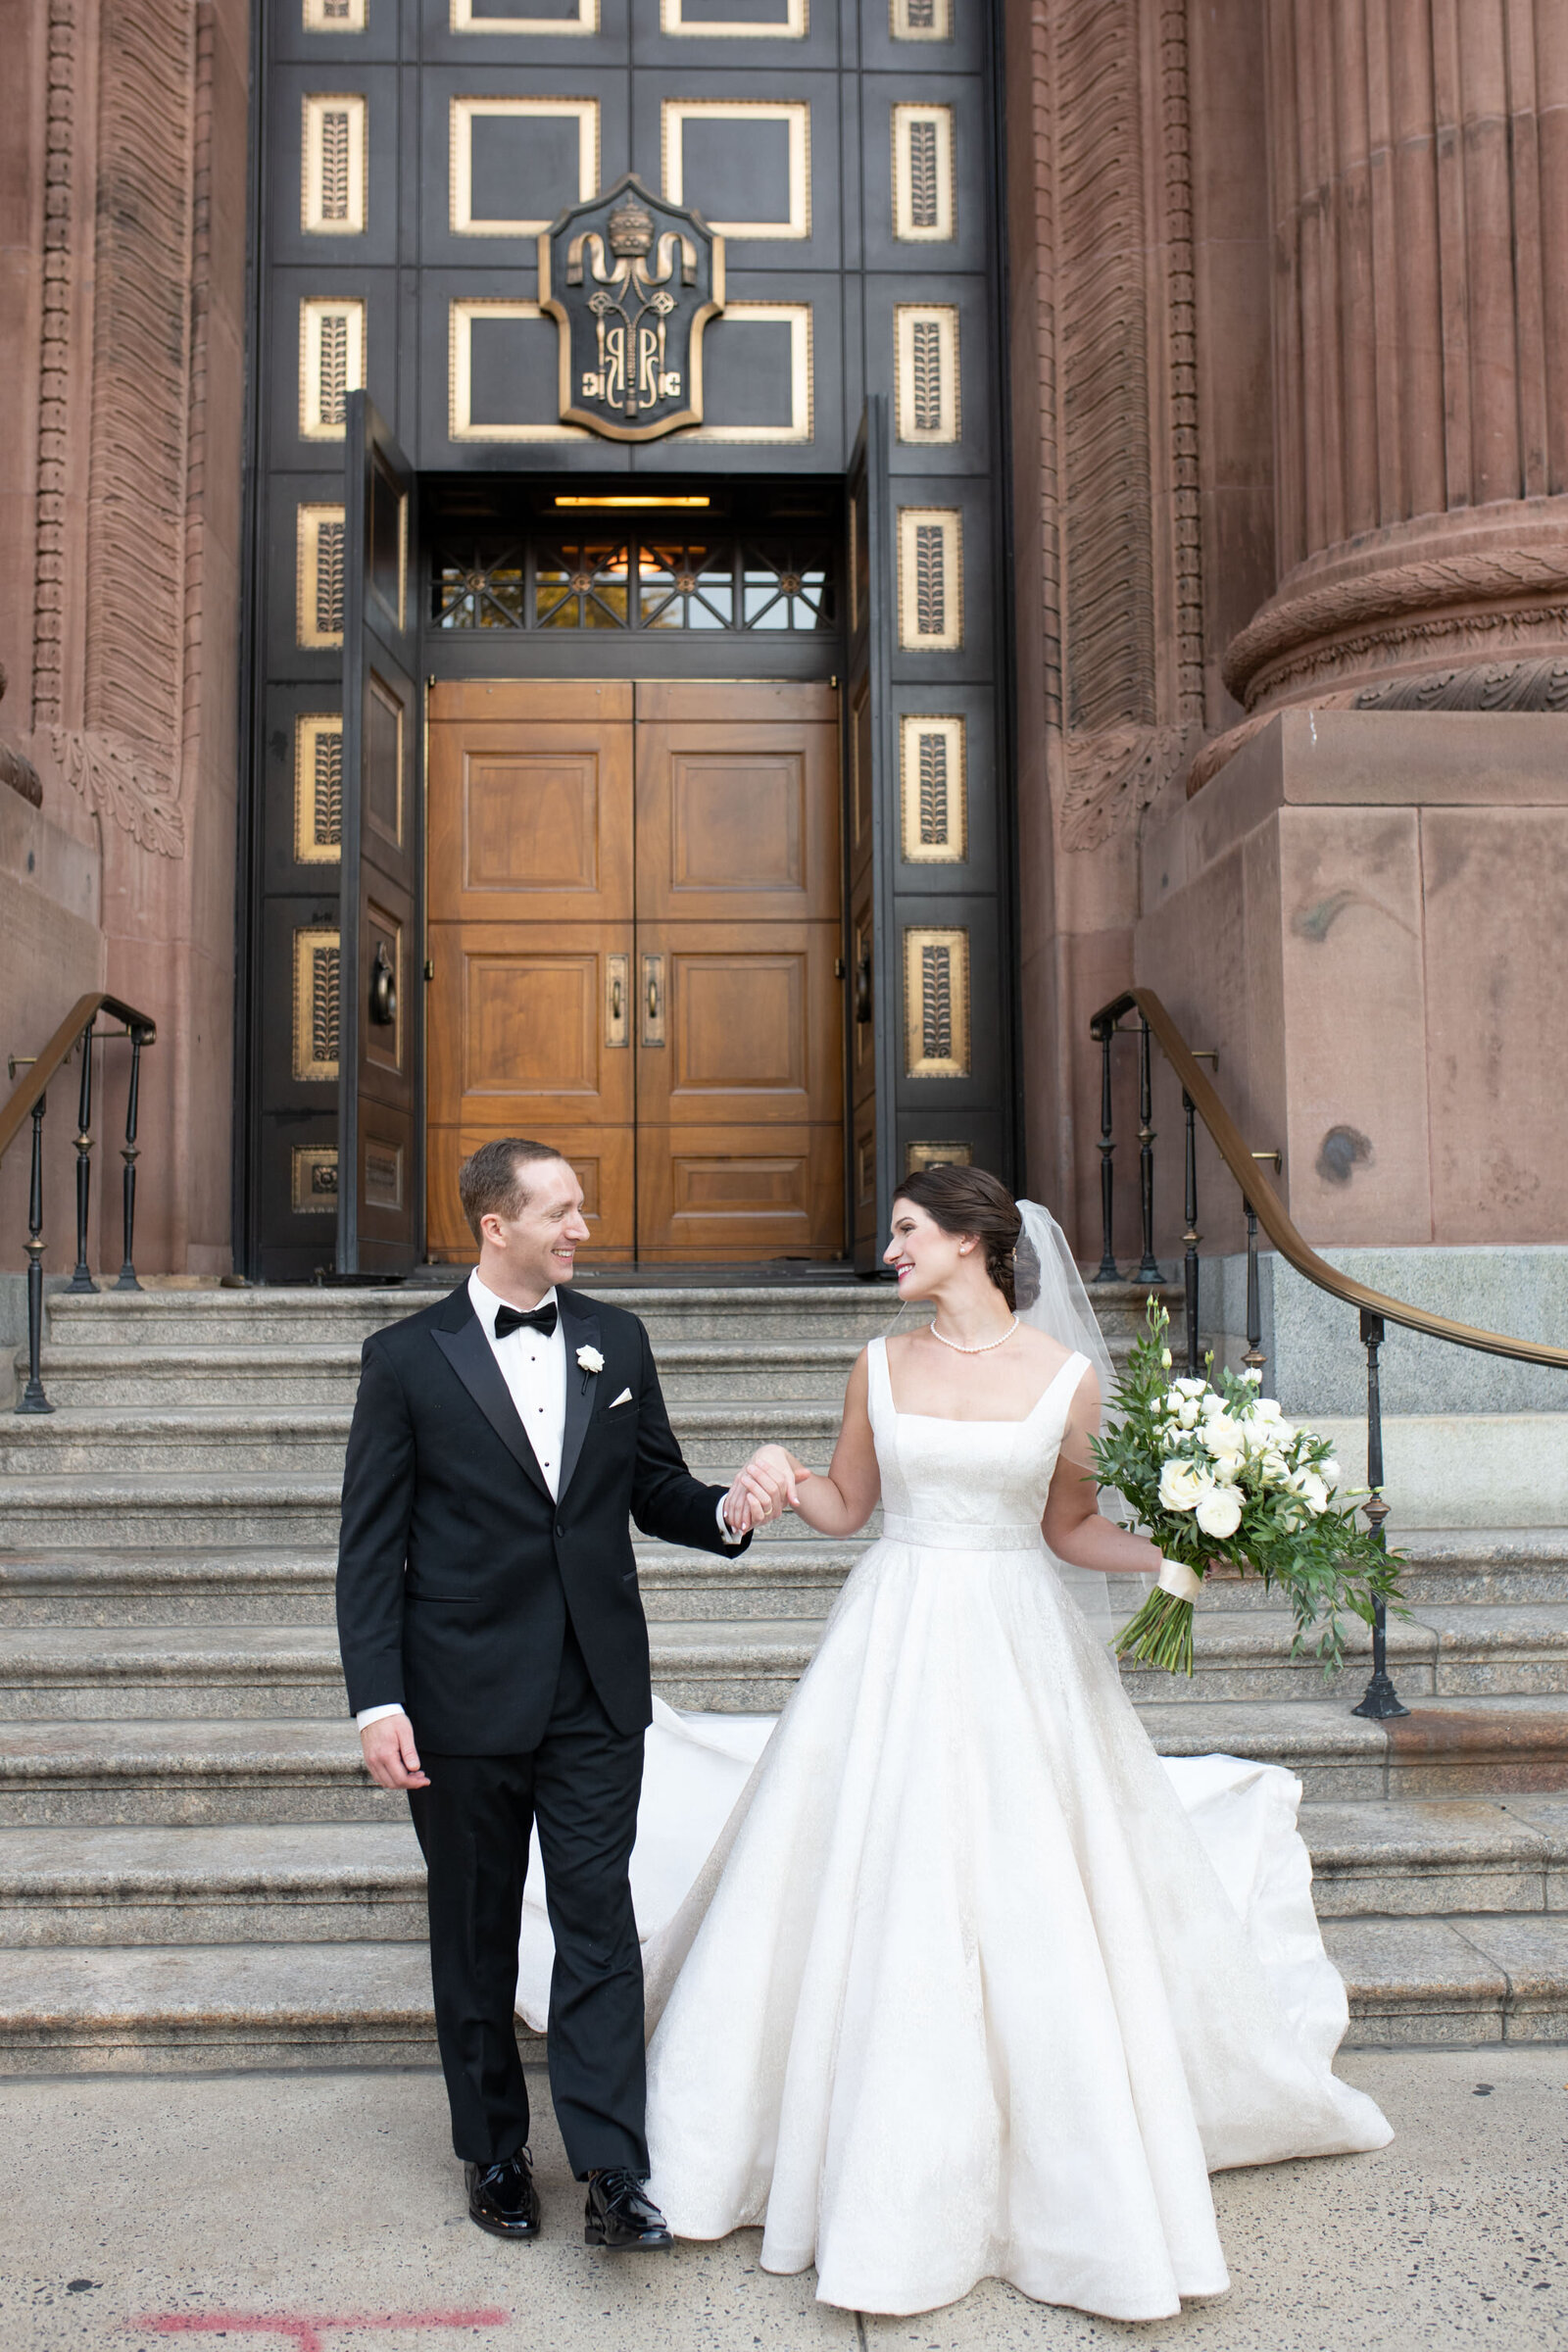 A bride and groom stand in front of a catholic church.